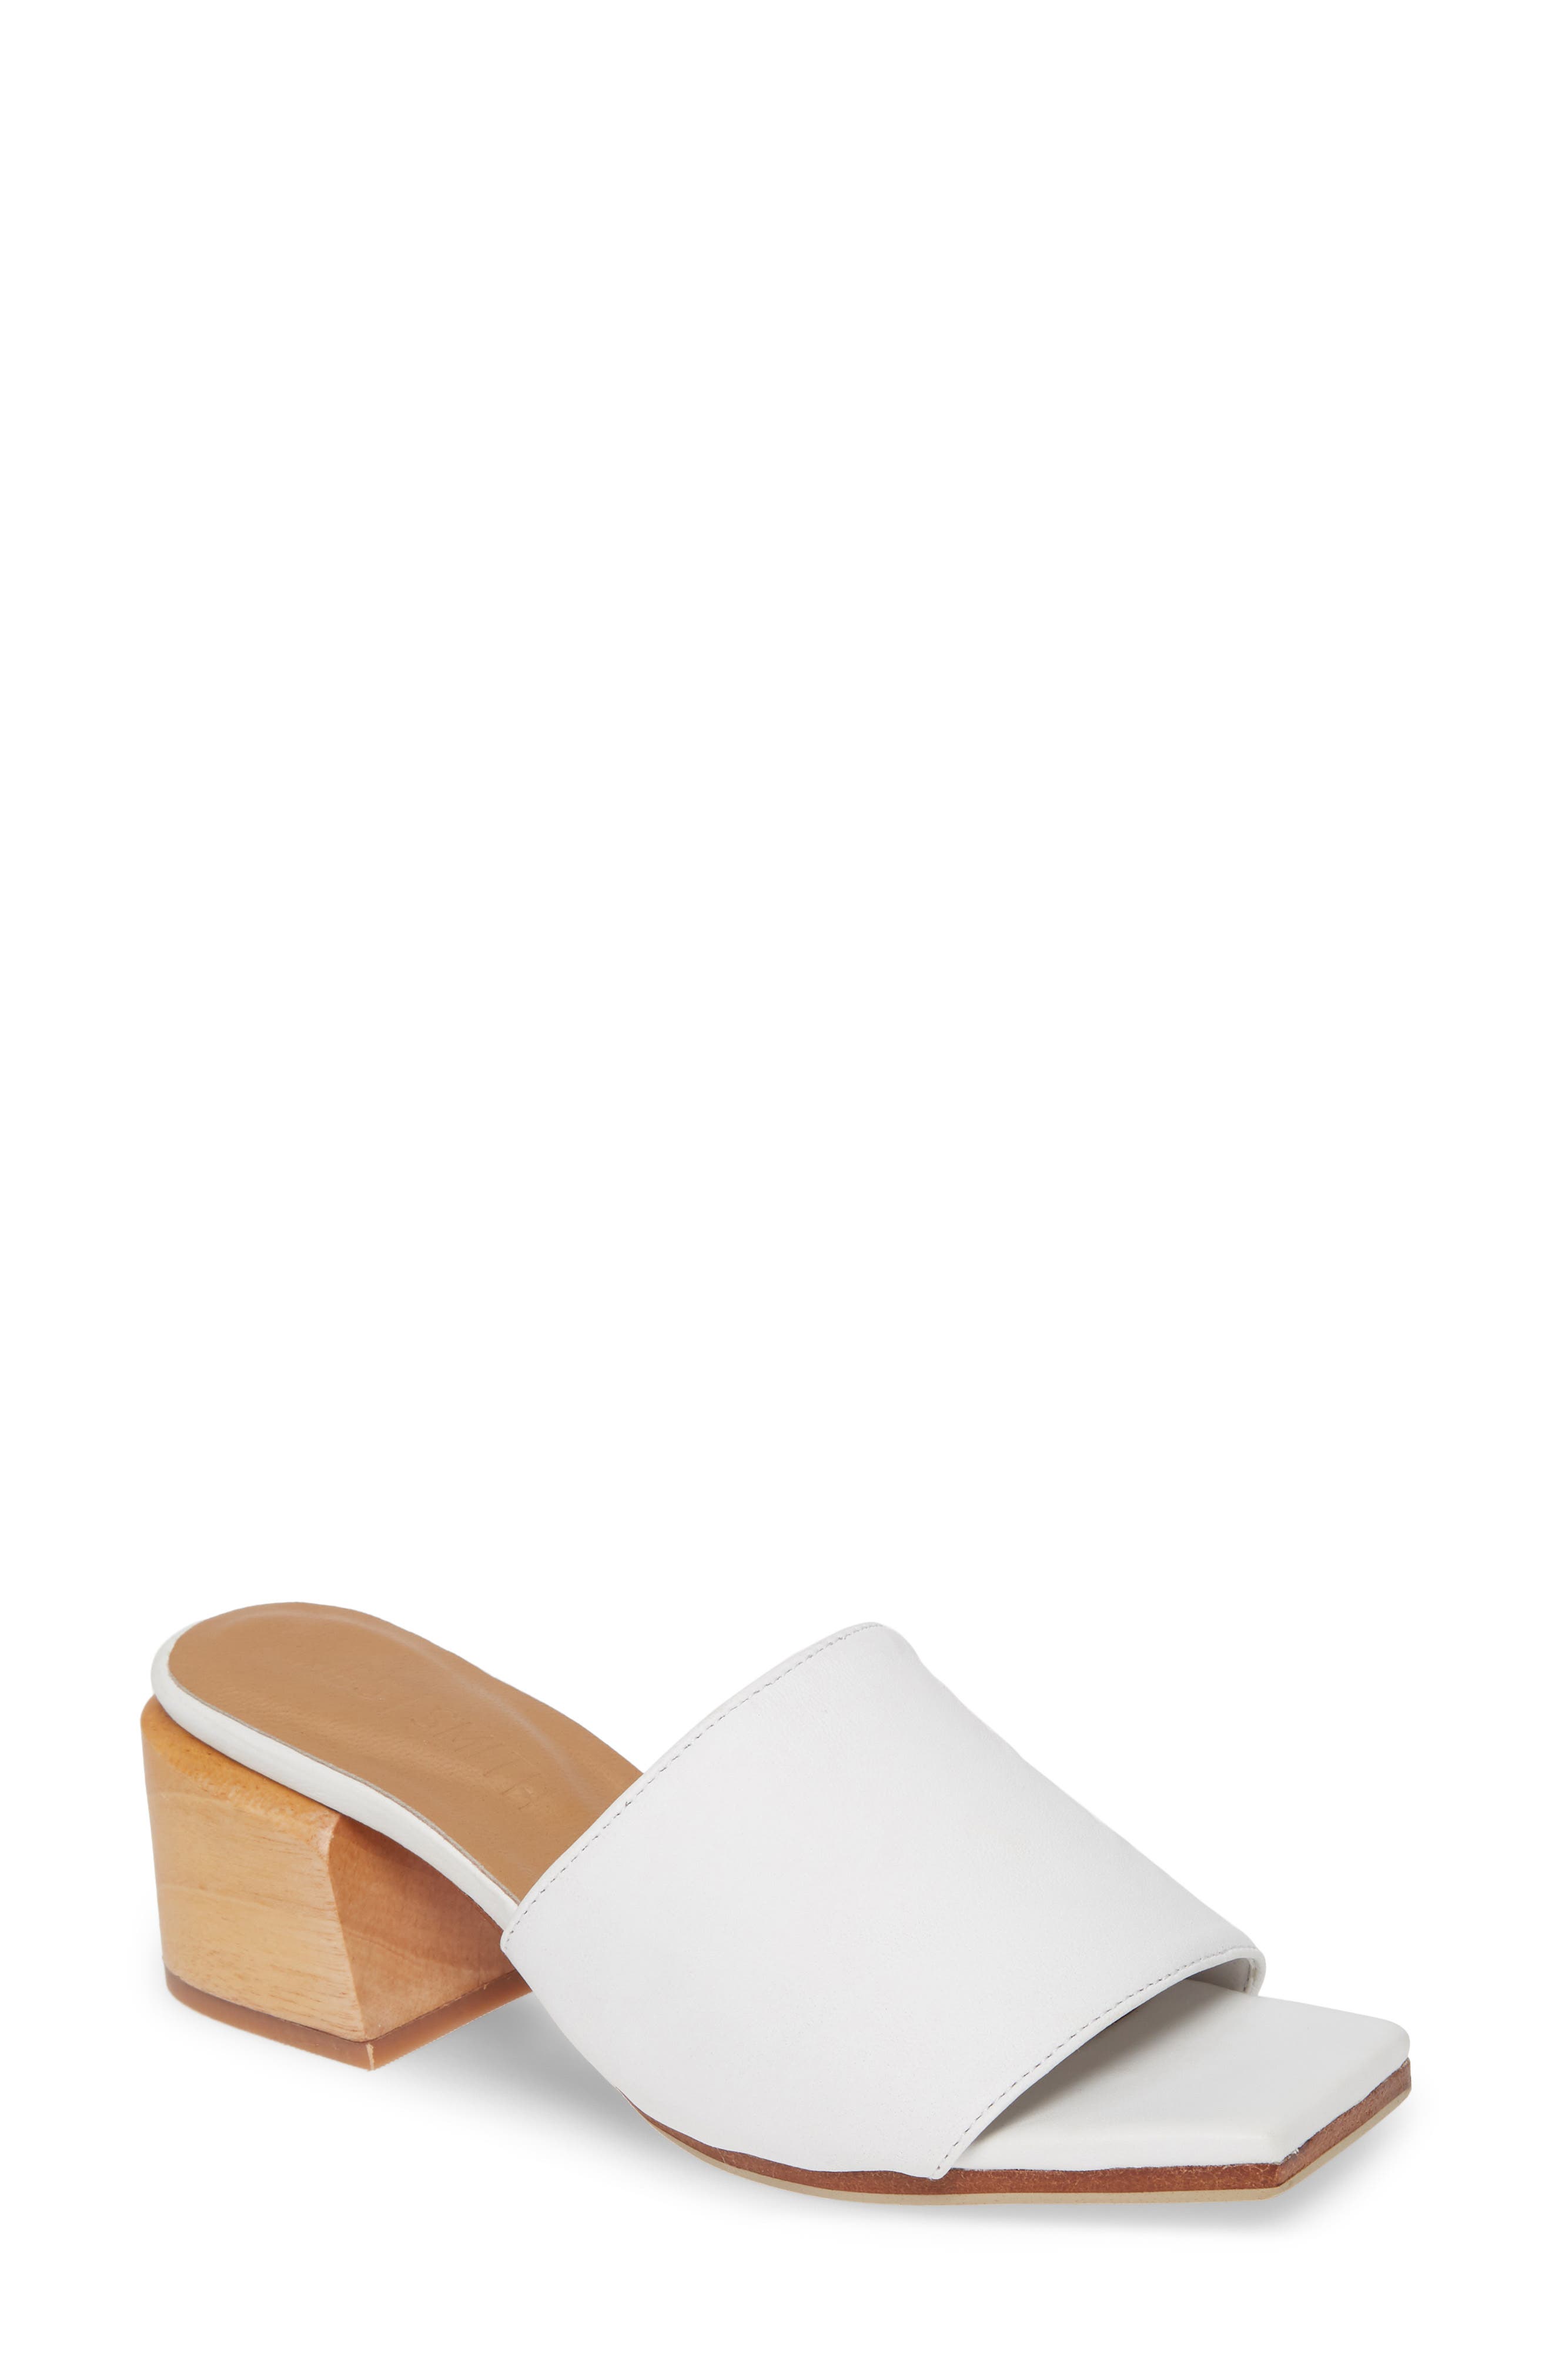 Women's James Smith Shoes | Nordstrom